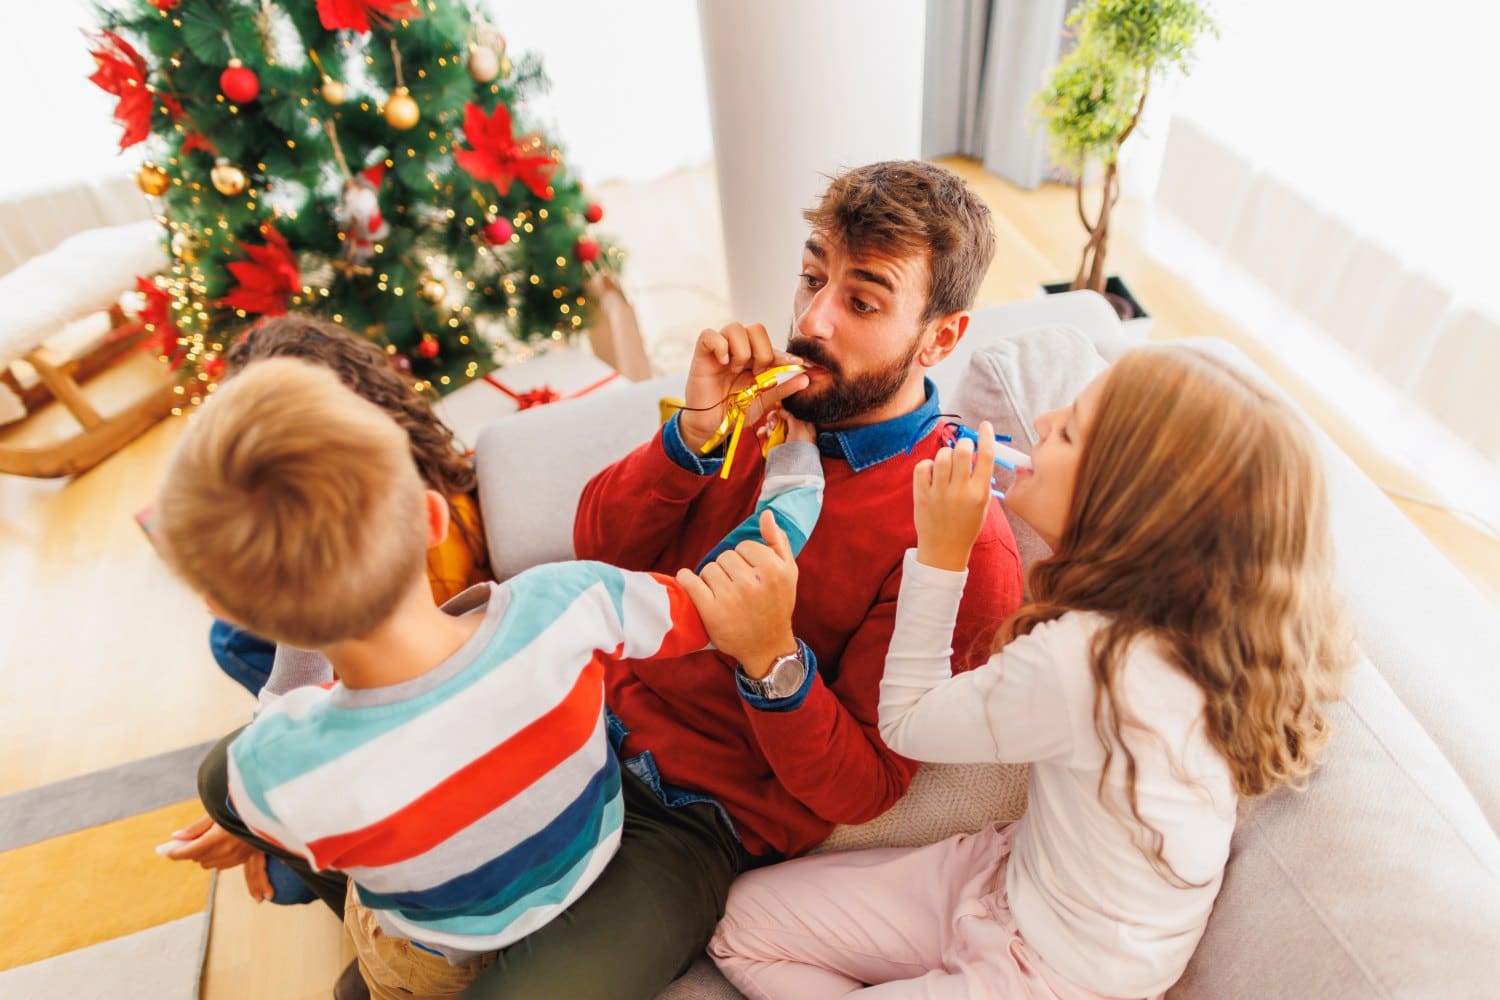 Parents having fun playing with children while spending Christmas at home, blowing party whistles and laughing